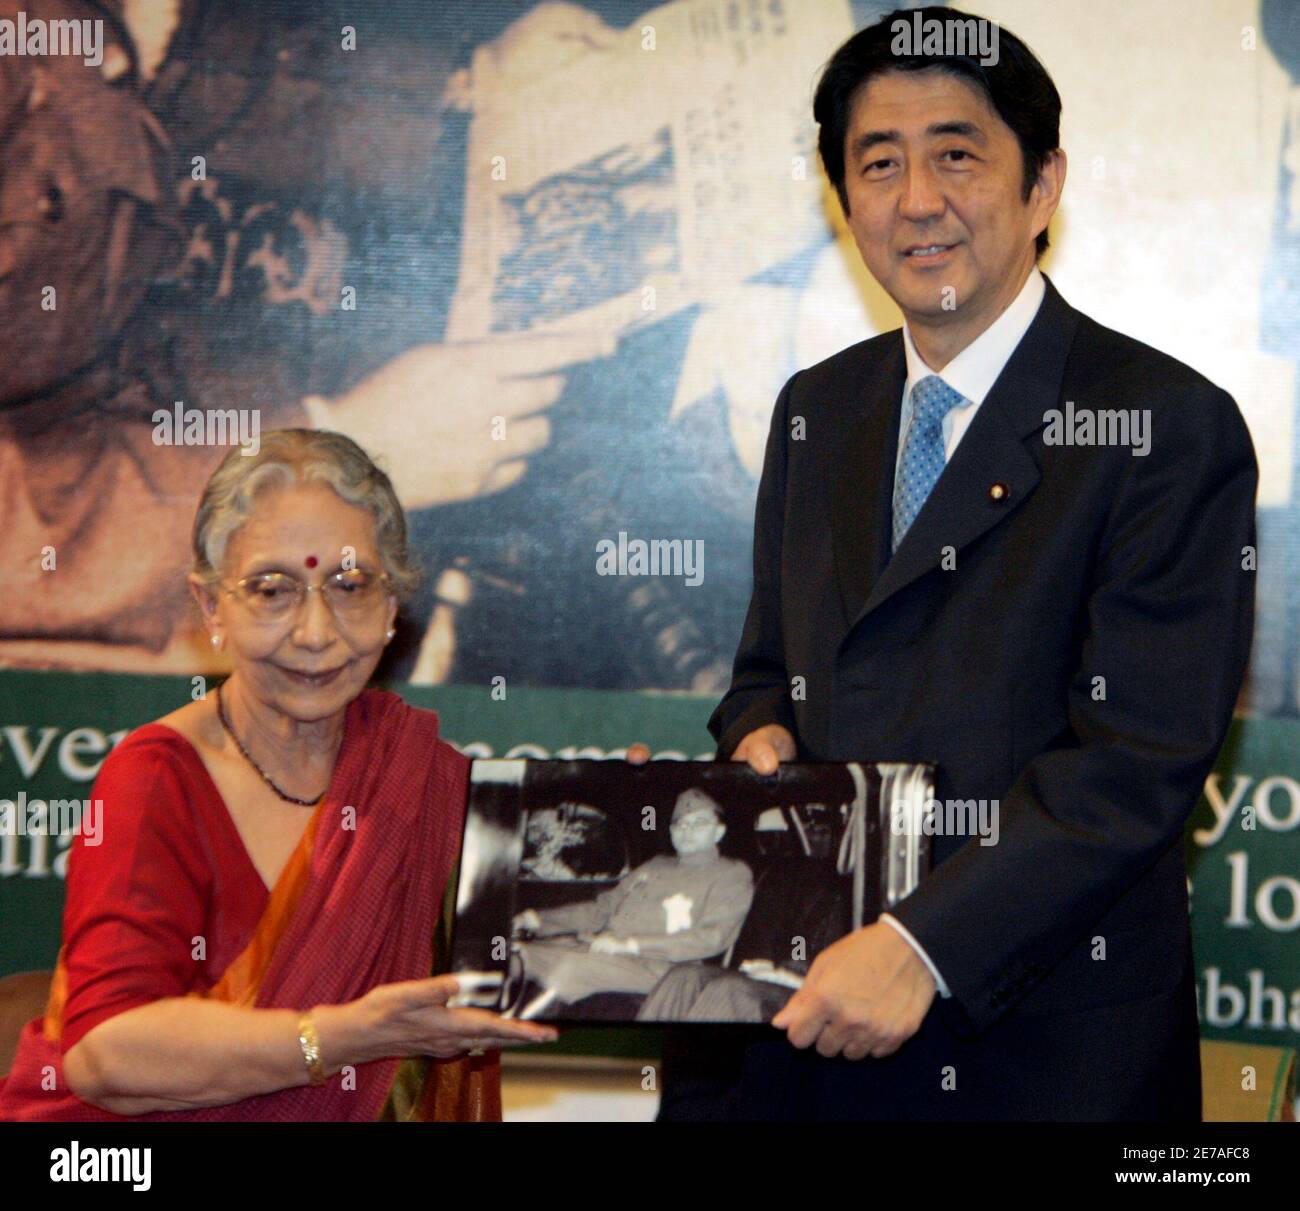 Japan's Prime Minister Shinzo Abe (R) is gifted a photograph of Indian  freedom fighter Netaji Subhas Chandra Bose by Krishna Bose, Chairperson of  Netaji Research Bureau, during his visit to the residence